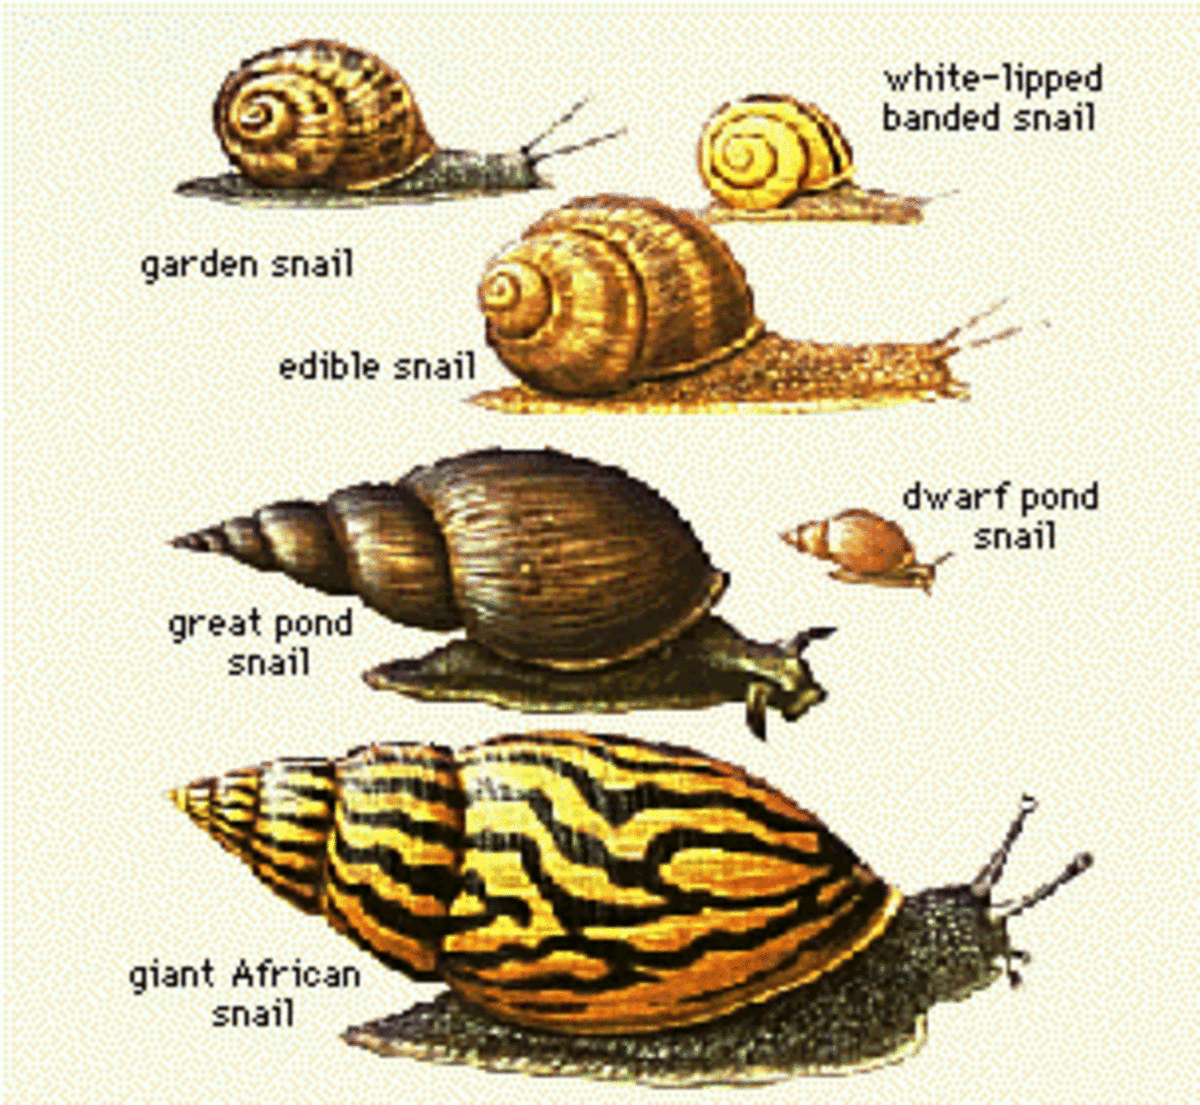 A Quick Look at Different Kinds of Snails